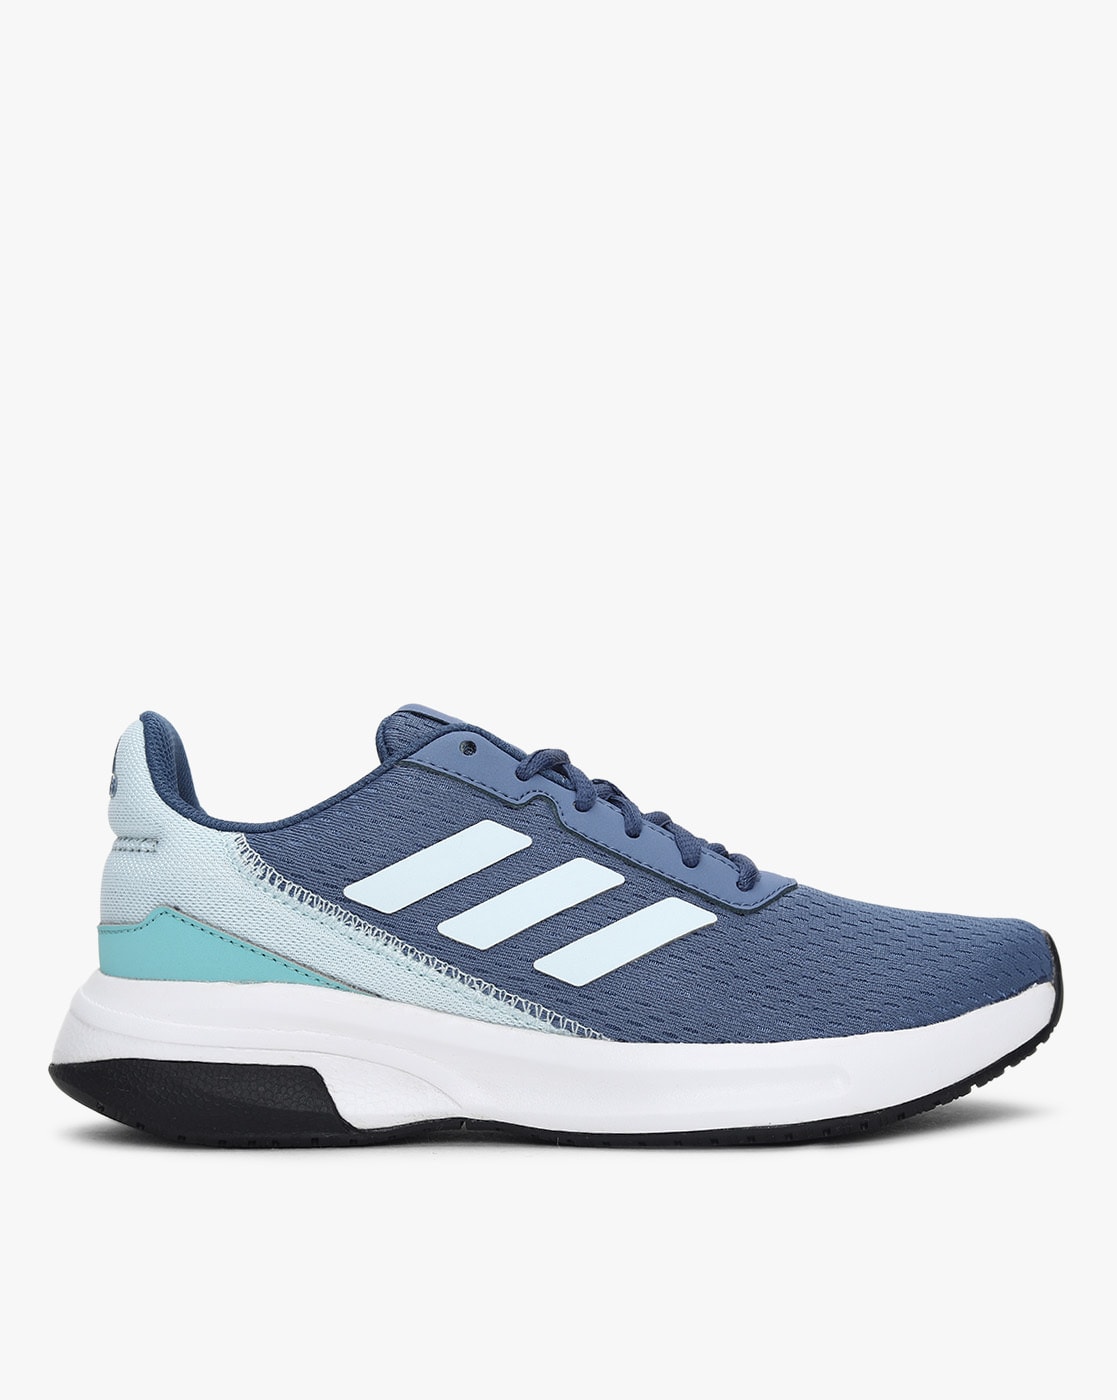 Adidas must-have shoes are now 50% off for adiClub members in rare sale -  syracuse.com